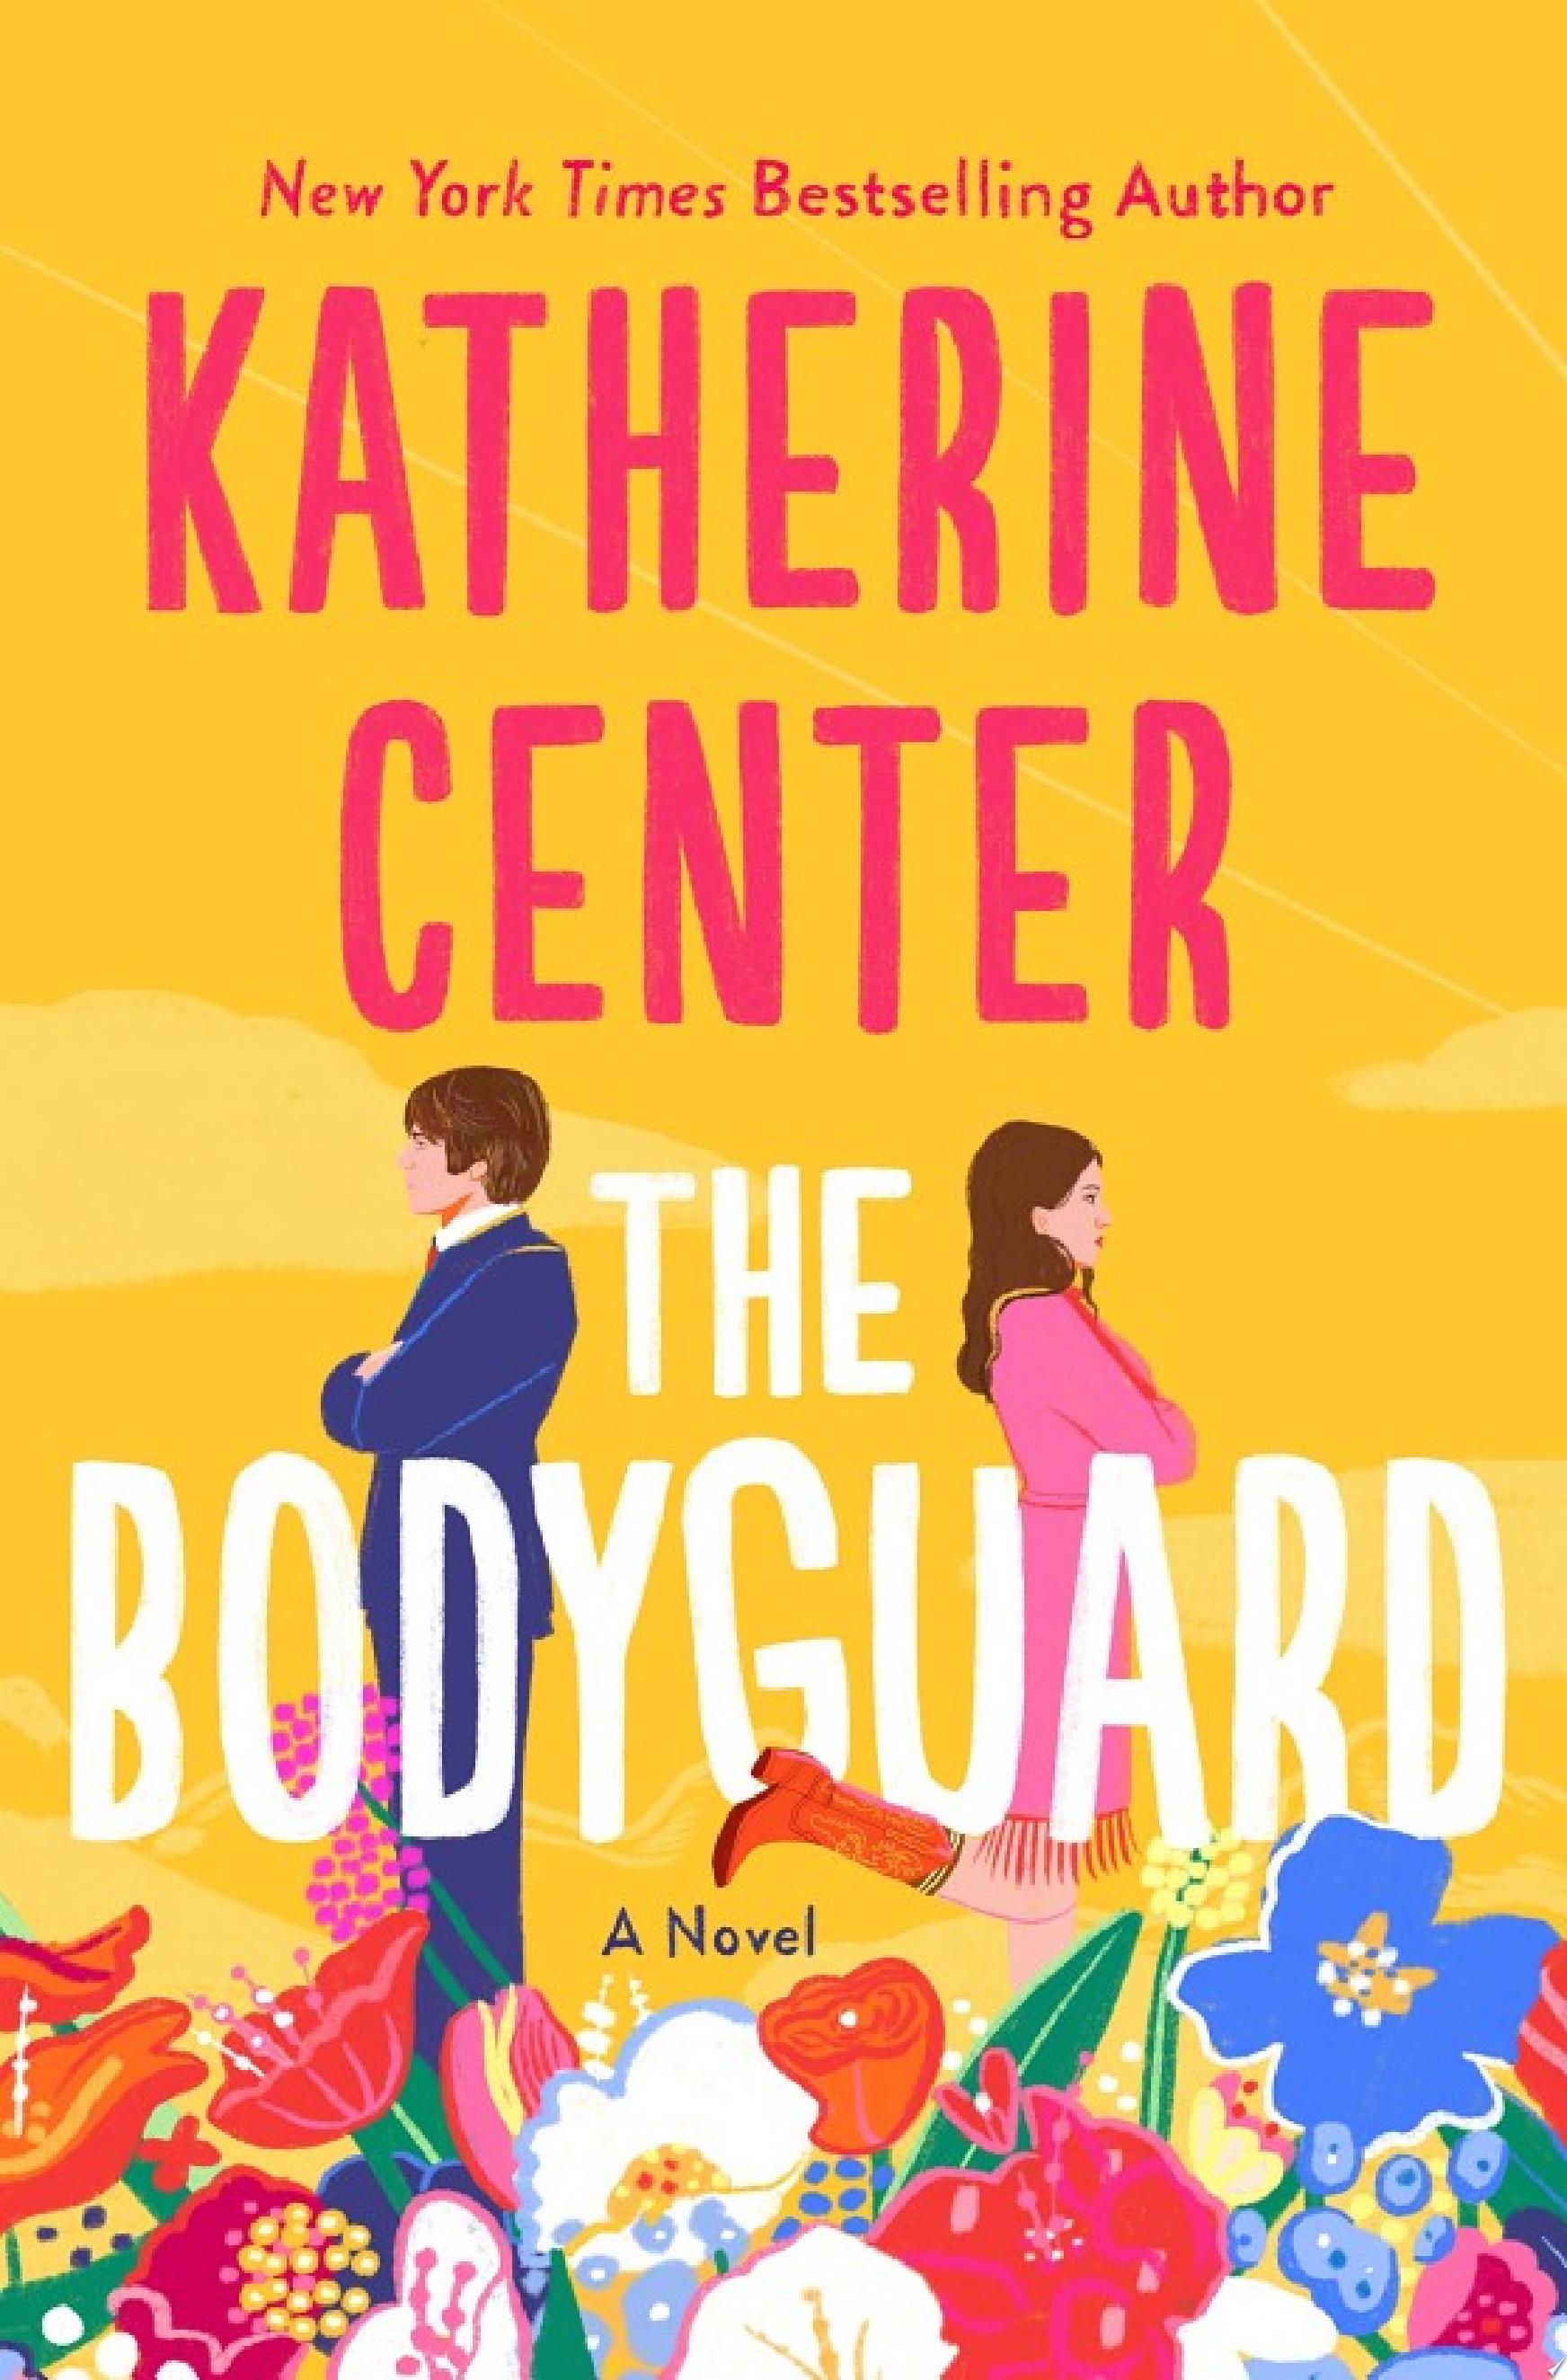 Image for "The Bodyguard"